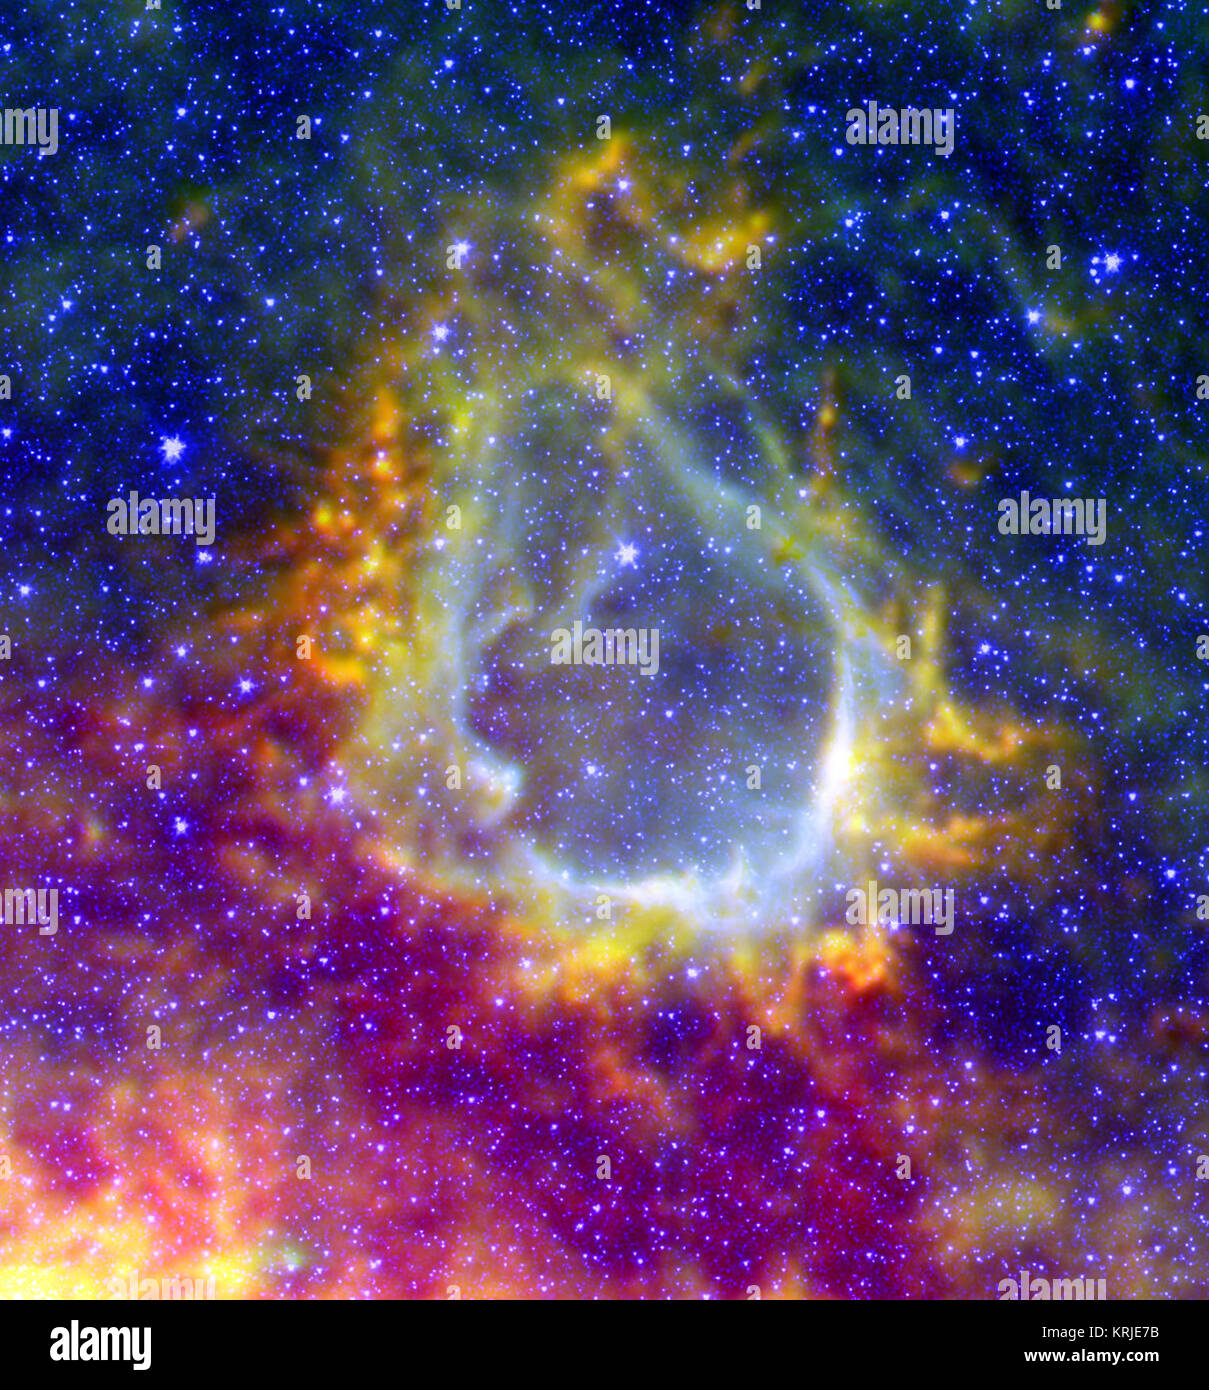 This image shows a composite of RCW 120 with data from Herschel Space Observatory and Spitzer Space Telescope. In the composite image red and yellow show cool dust, seen by Herschel. Bluer colors show warmer dust detected by Spitzer, as well as stars which are either in front of or behind the ring. Rings of Infrared Stock Photo